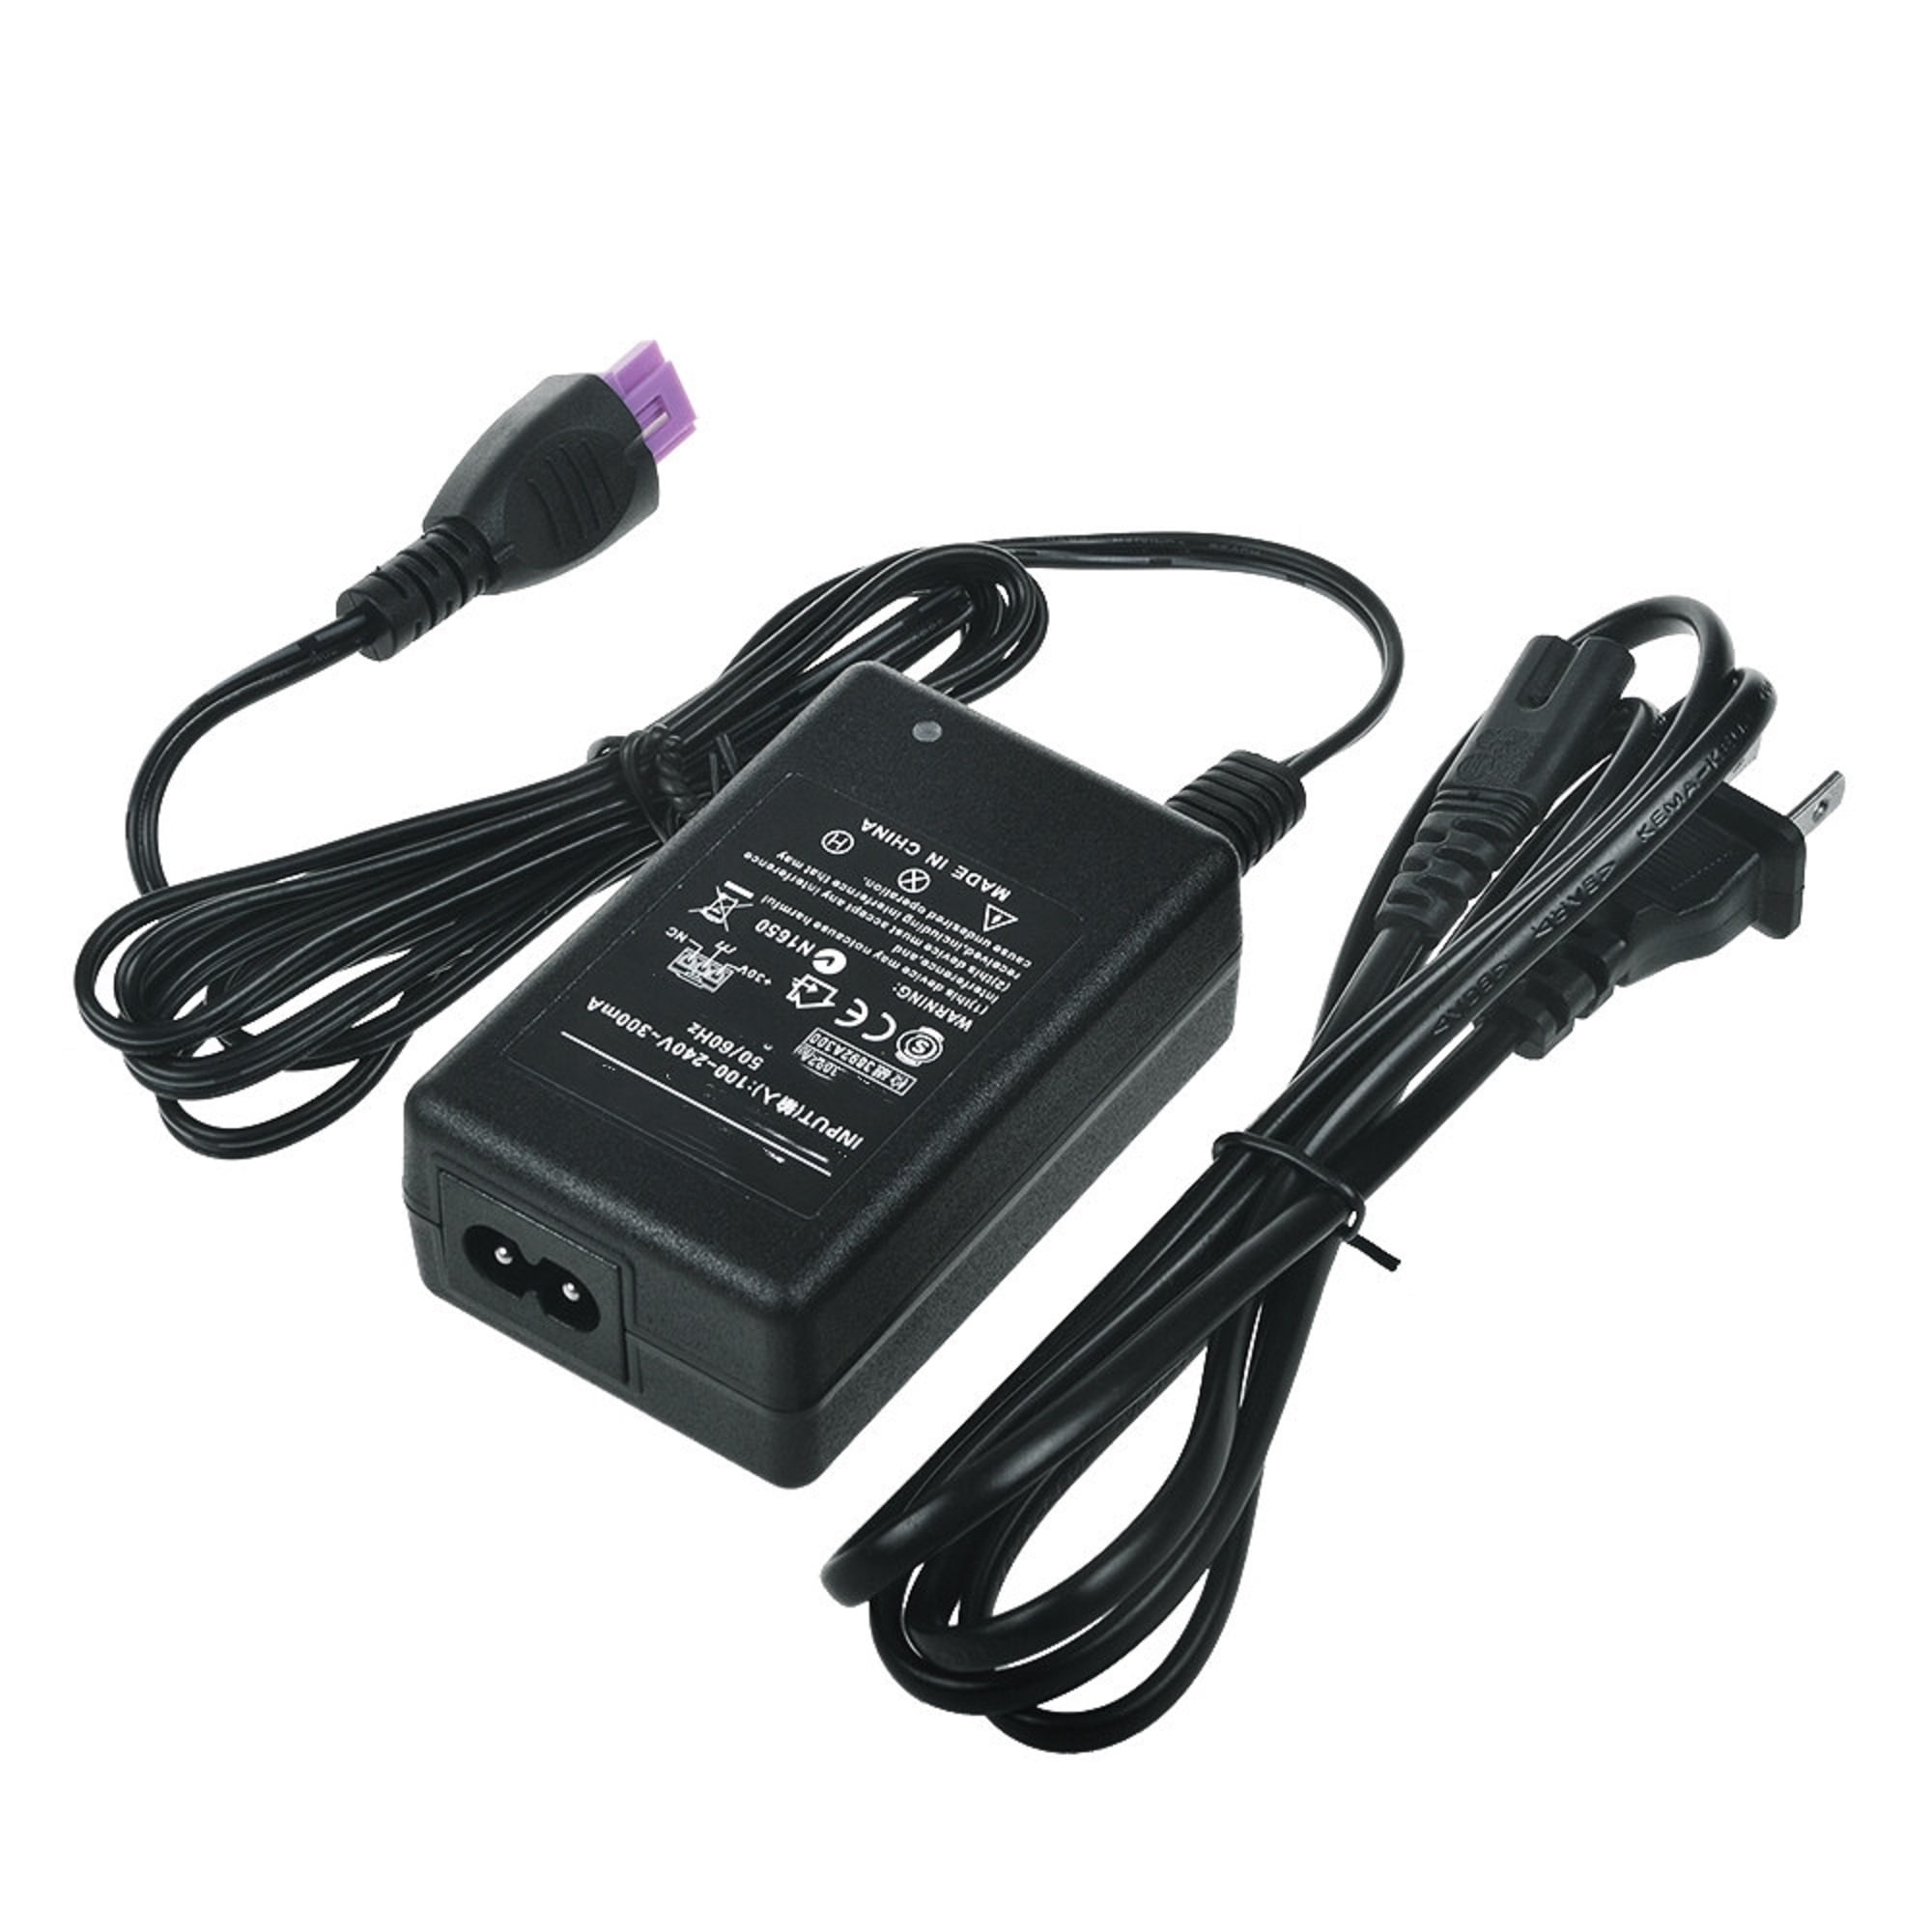 AC Power Adapter Charger Supply For HP Deskjet 3056A 3510 3511 3512 Printer 